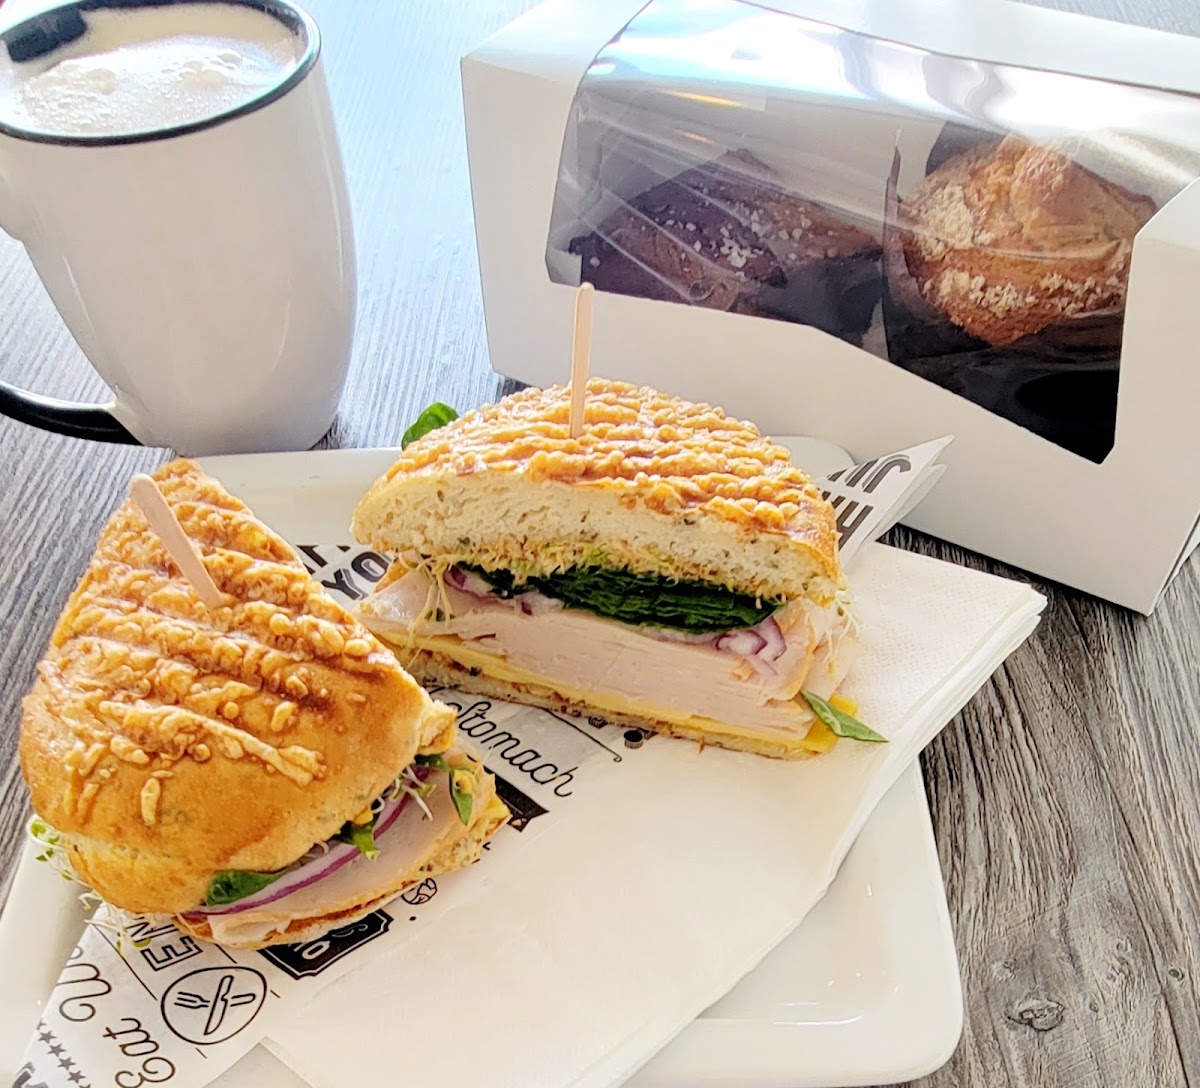 Turkey panini and latte with brownie and muffin to go